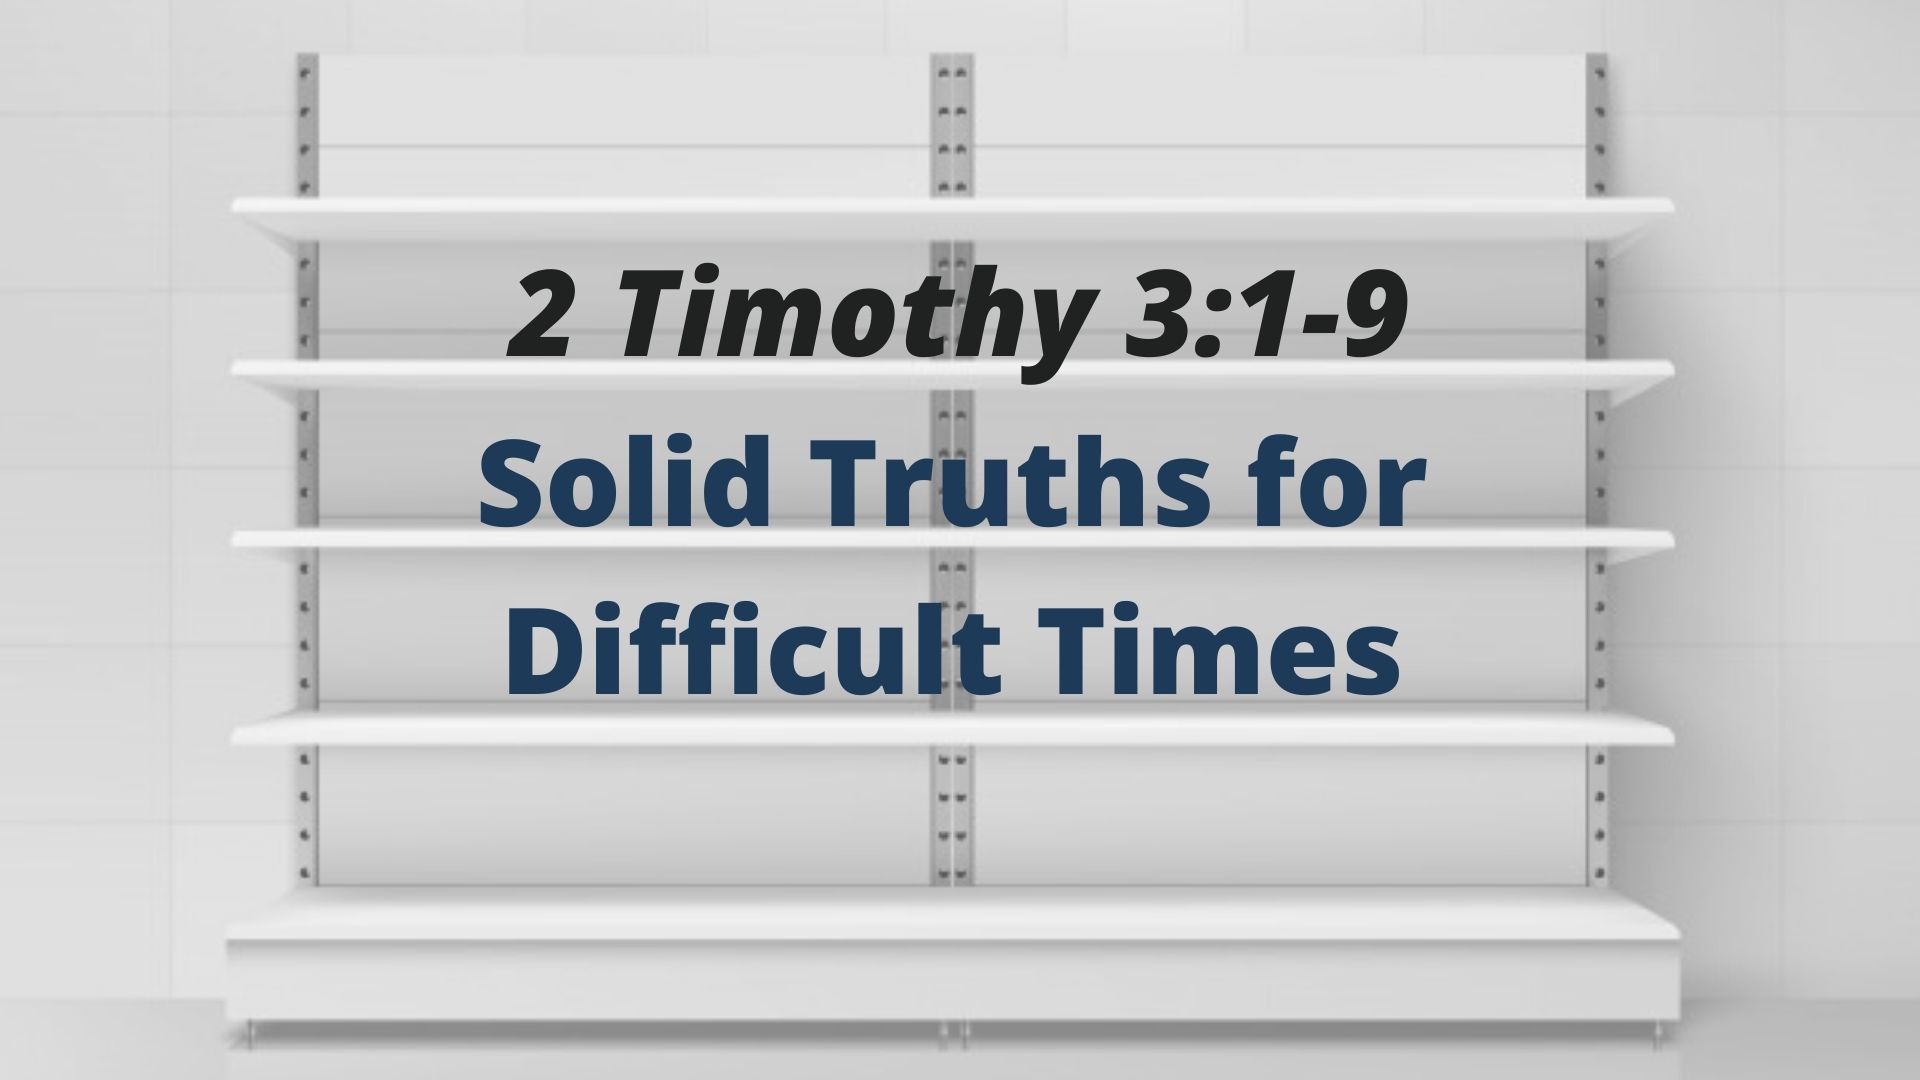 Solid Truths for Difficult Times (2 Timothy 3:1-9) Image